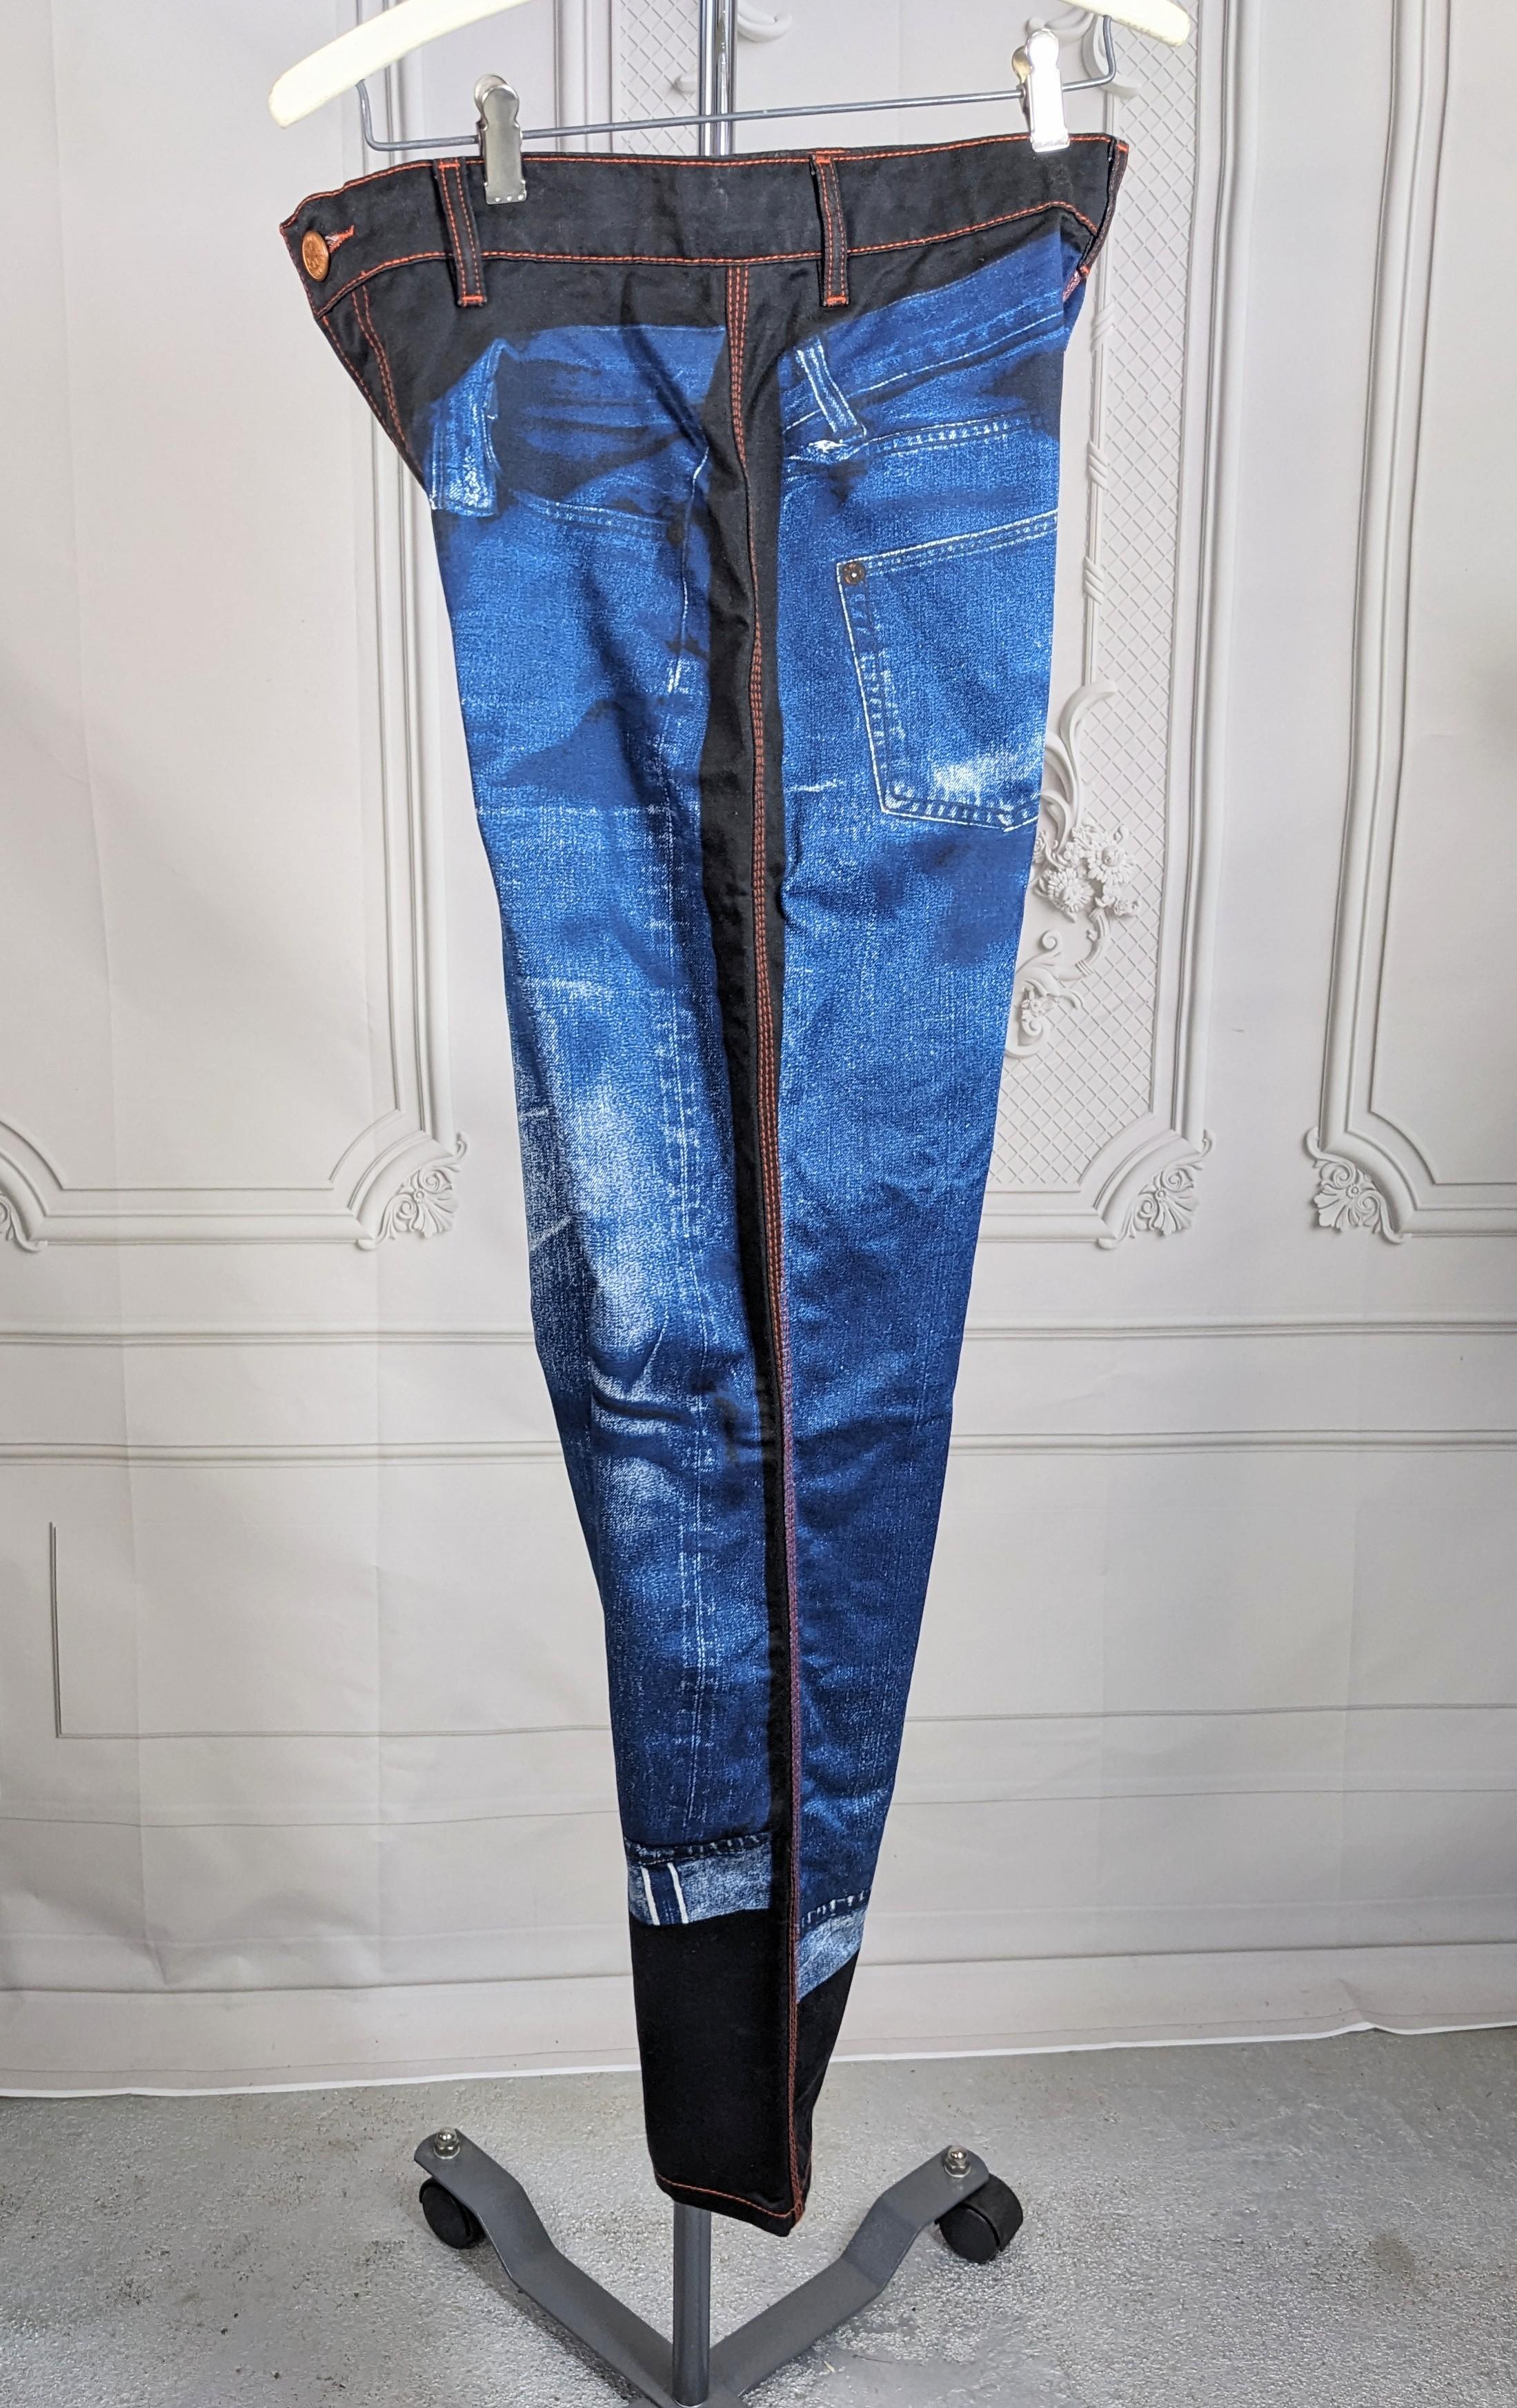 Jean Paul Gaultier Trompe L'Oiel Jeans In Good Condition For Sale In New York, NY